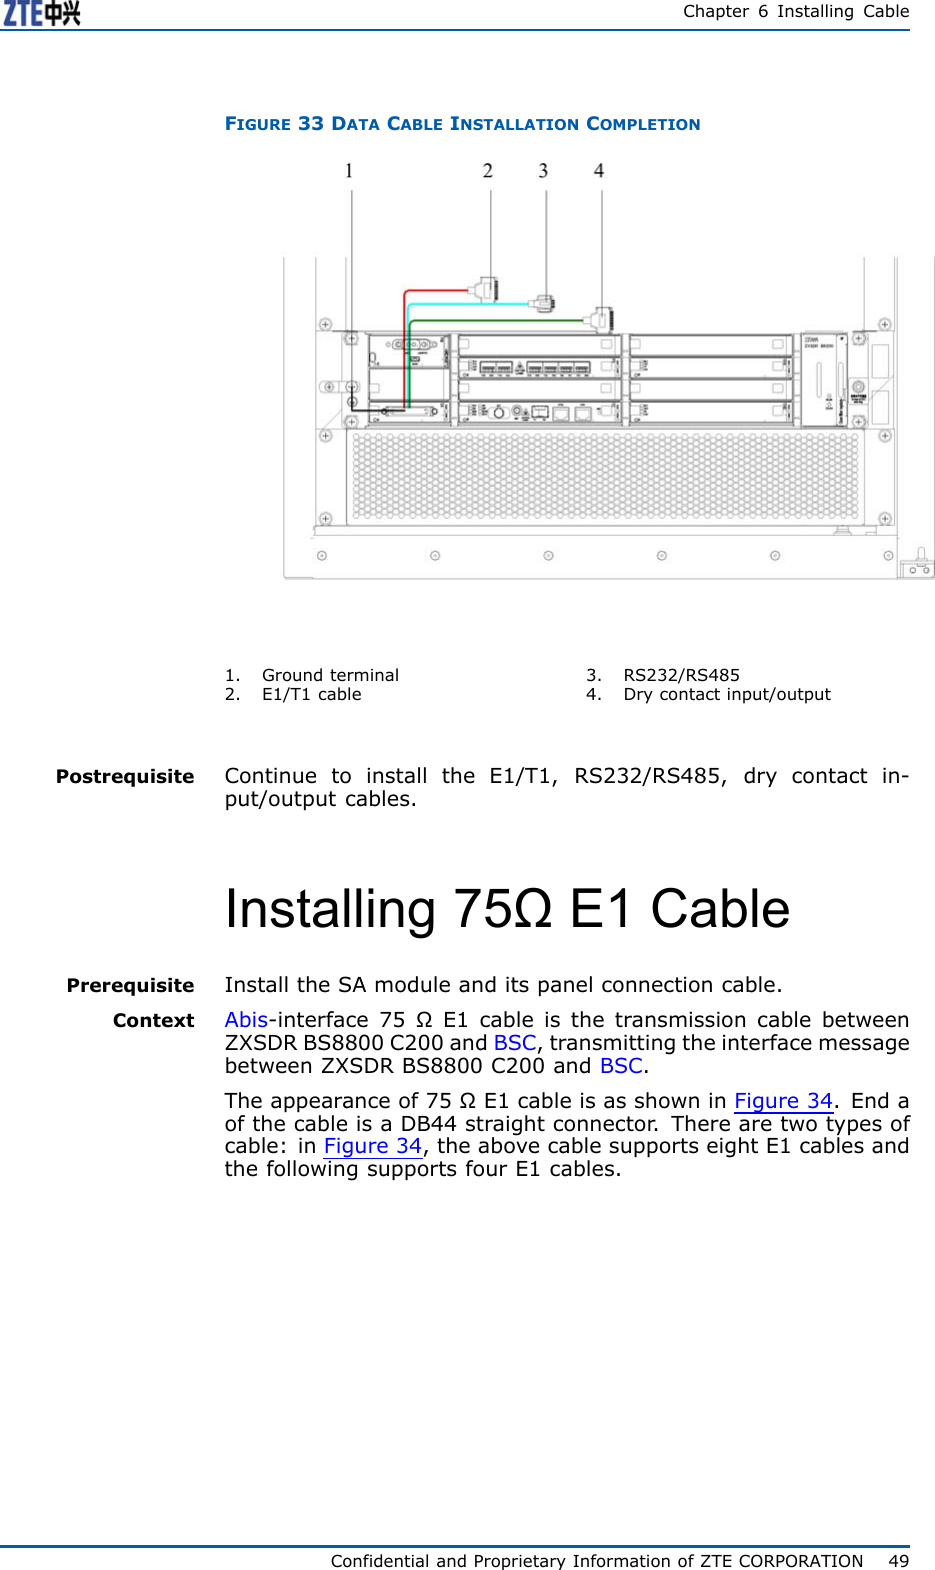 Chapter6InstallingCableFIGURE33DATACABLEINSTALLATIONCOMPLETION1.Groundterminal2.E1/T1cable3.RS232/RS4854.Drycontactinput/outputPostrequisiteContinuetoinstalltheE1/T1,RS232/RS485,drycontactin-put/outputcables.Installing75ΩE1CablePrerequisiteInstalltheSAmoduleanditspanelconnectioncable.ContextAbis-interface75ΩE1cableisthetransmissioncablebetweenZXSDRBS8800C200andBSC,transmittingtheinterfacemessagebetweenZXSDRBS8800C200andBSC.Theappearanceof75ΩE1cableisasshowninFi g u r e 3 4 .EndaofthecableisaDB44straightconnector .Therearetwotypesofcable:inFi g u r e 3 4 ,theabovecablesupportseightE1cablesandthefollowingsupportsfourE1cables.ConfidentialandProprietaryInformationofZTECORPORATION49